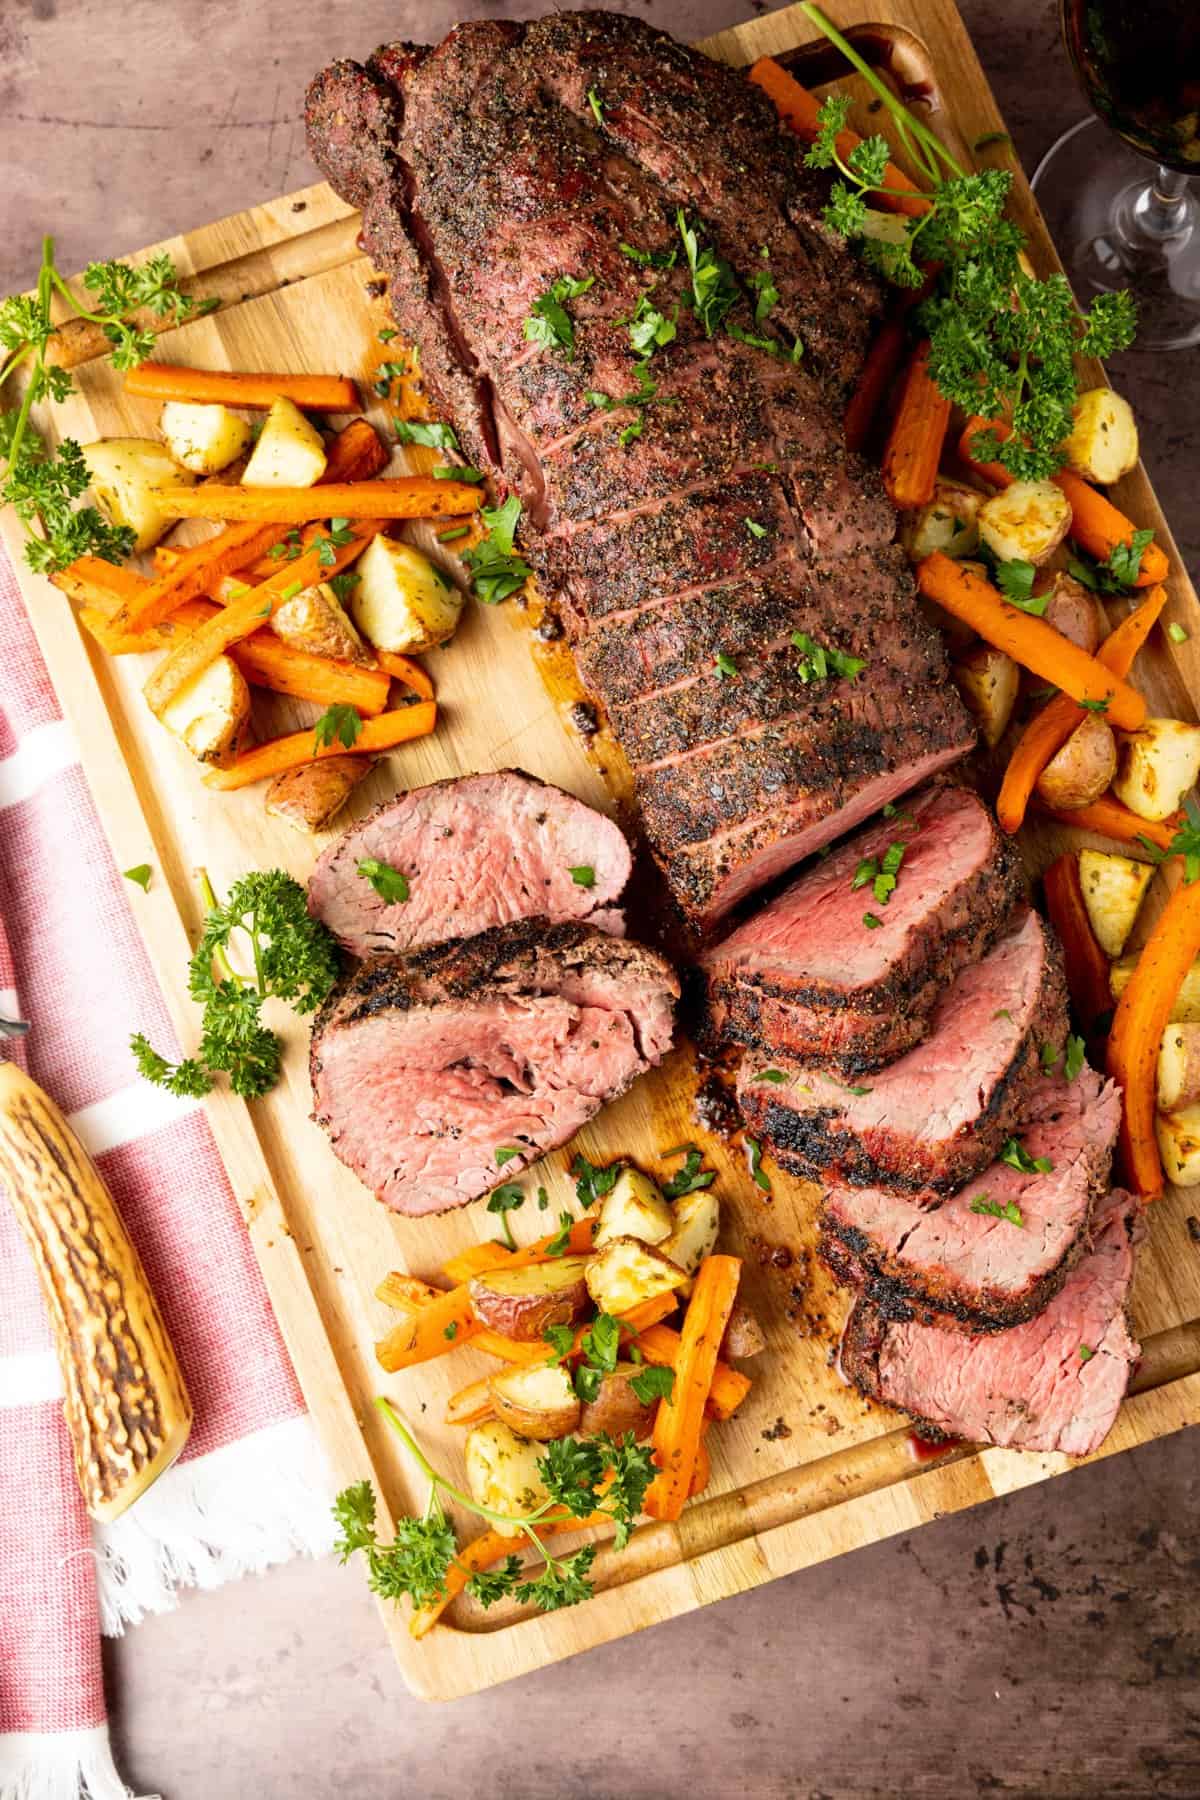 Smoked beef tenderloin on wood cutting board sliced to serve with potatoes and carrots surrounding the meat.